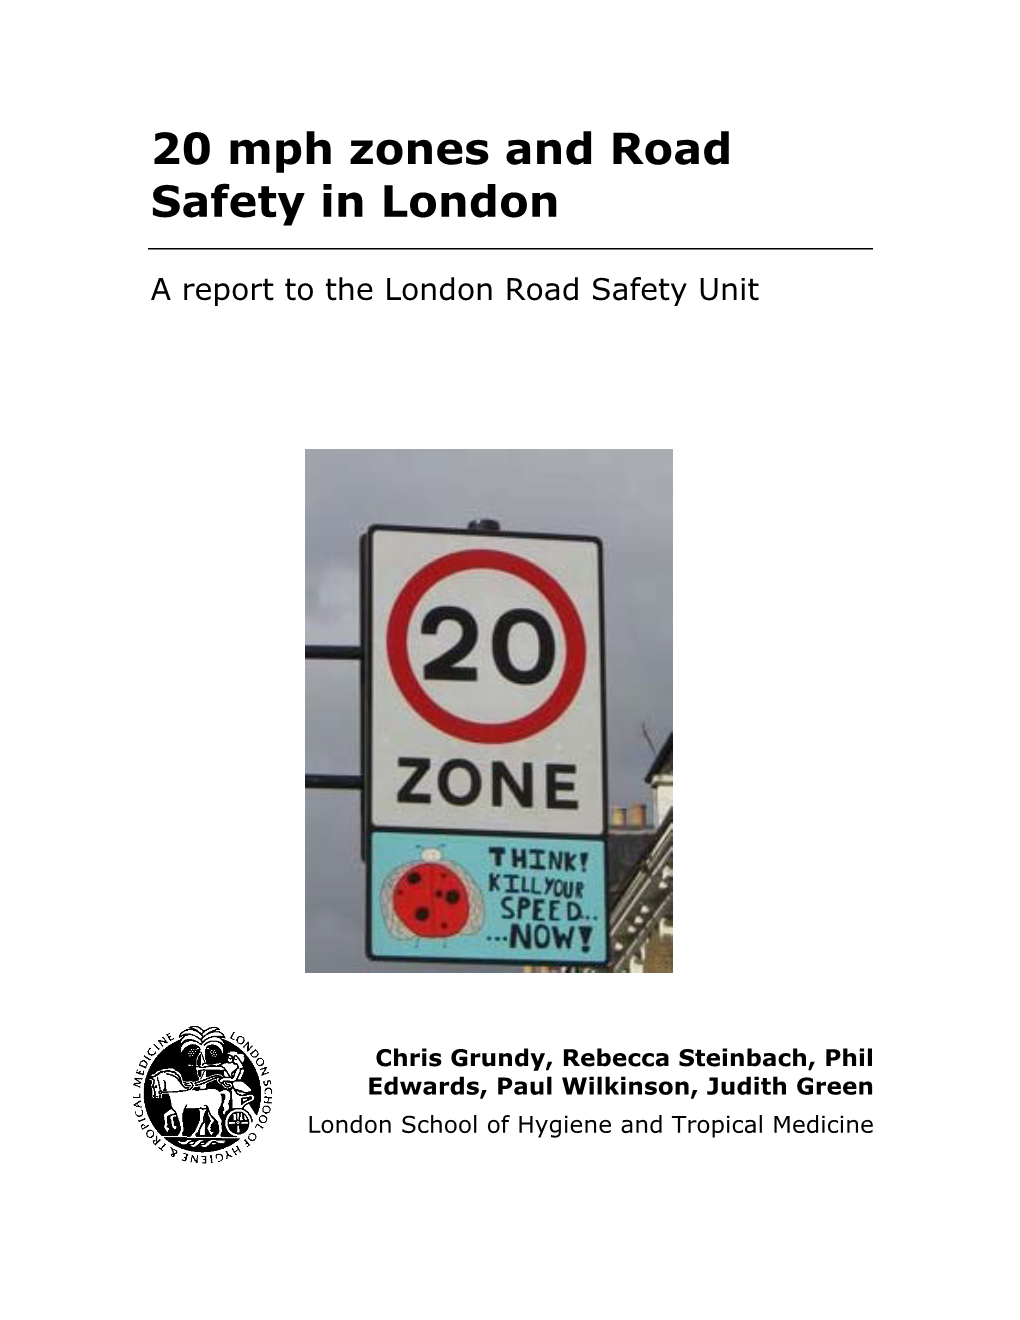 20 Mph Zones and Road Safety in London